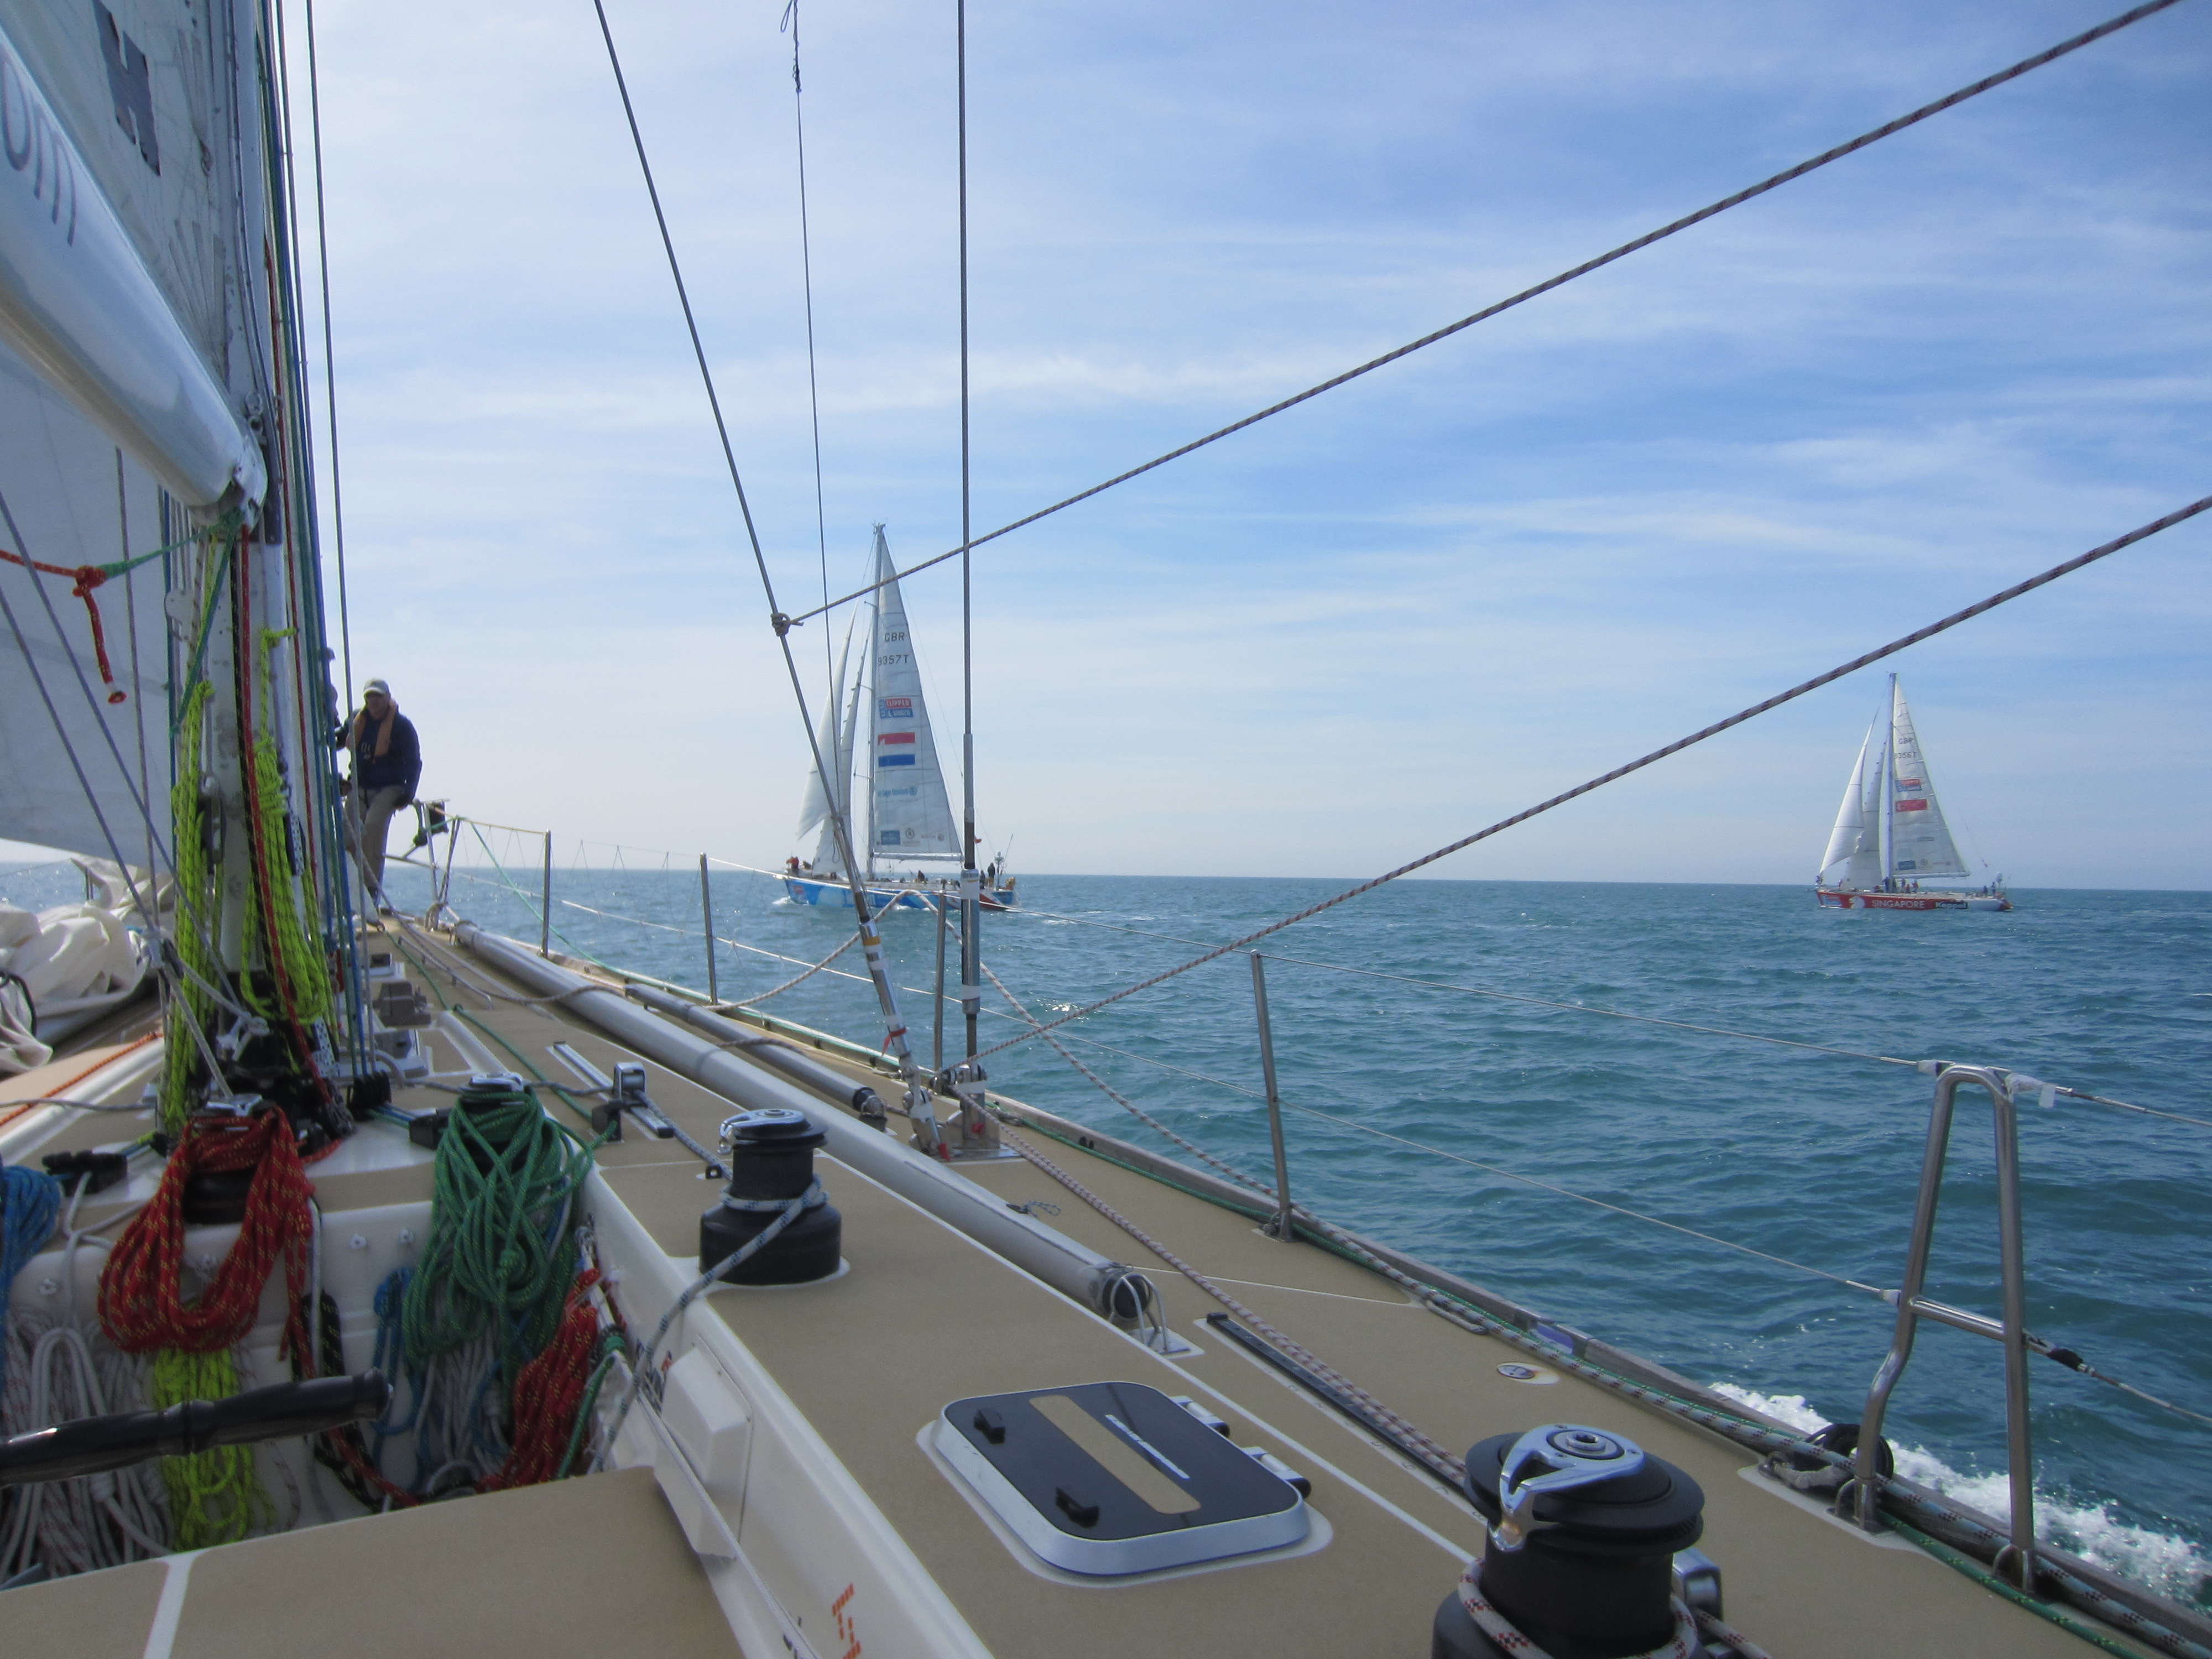 Racing Without Wind